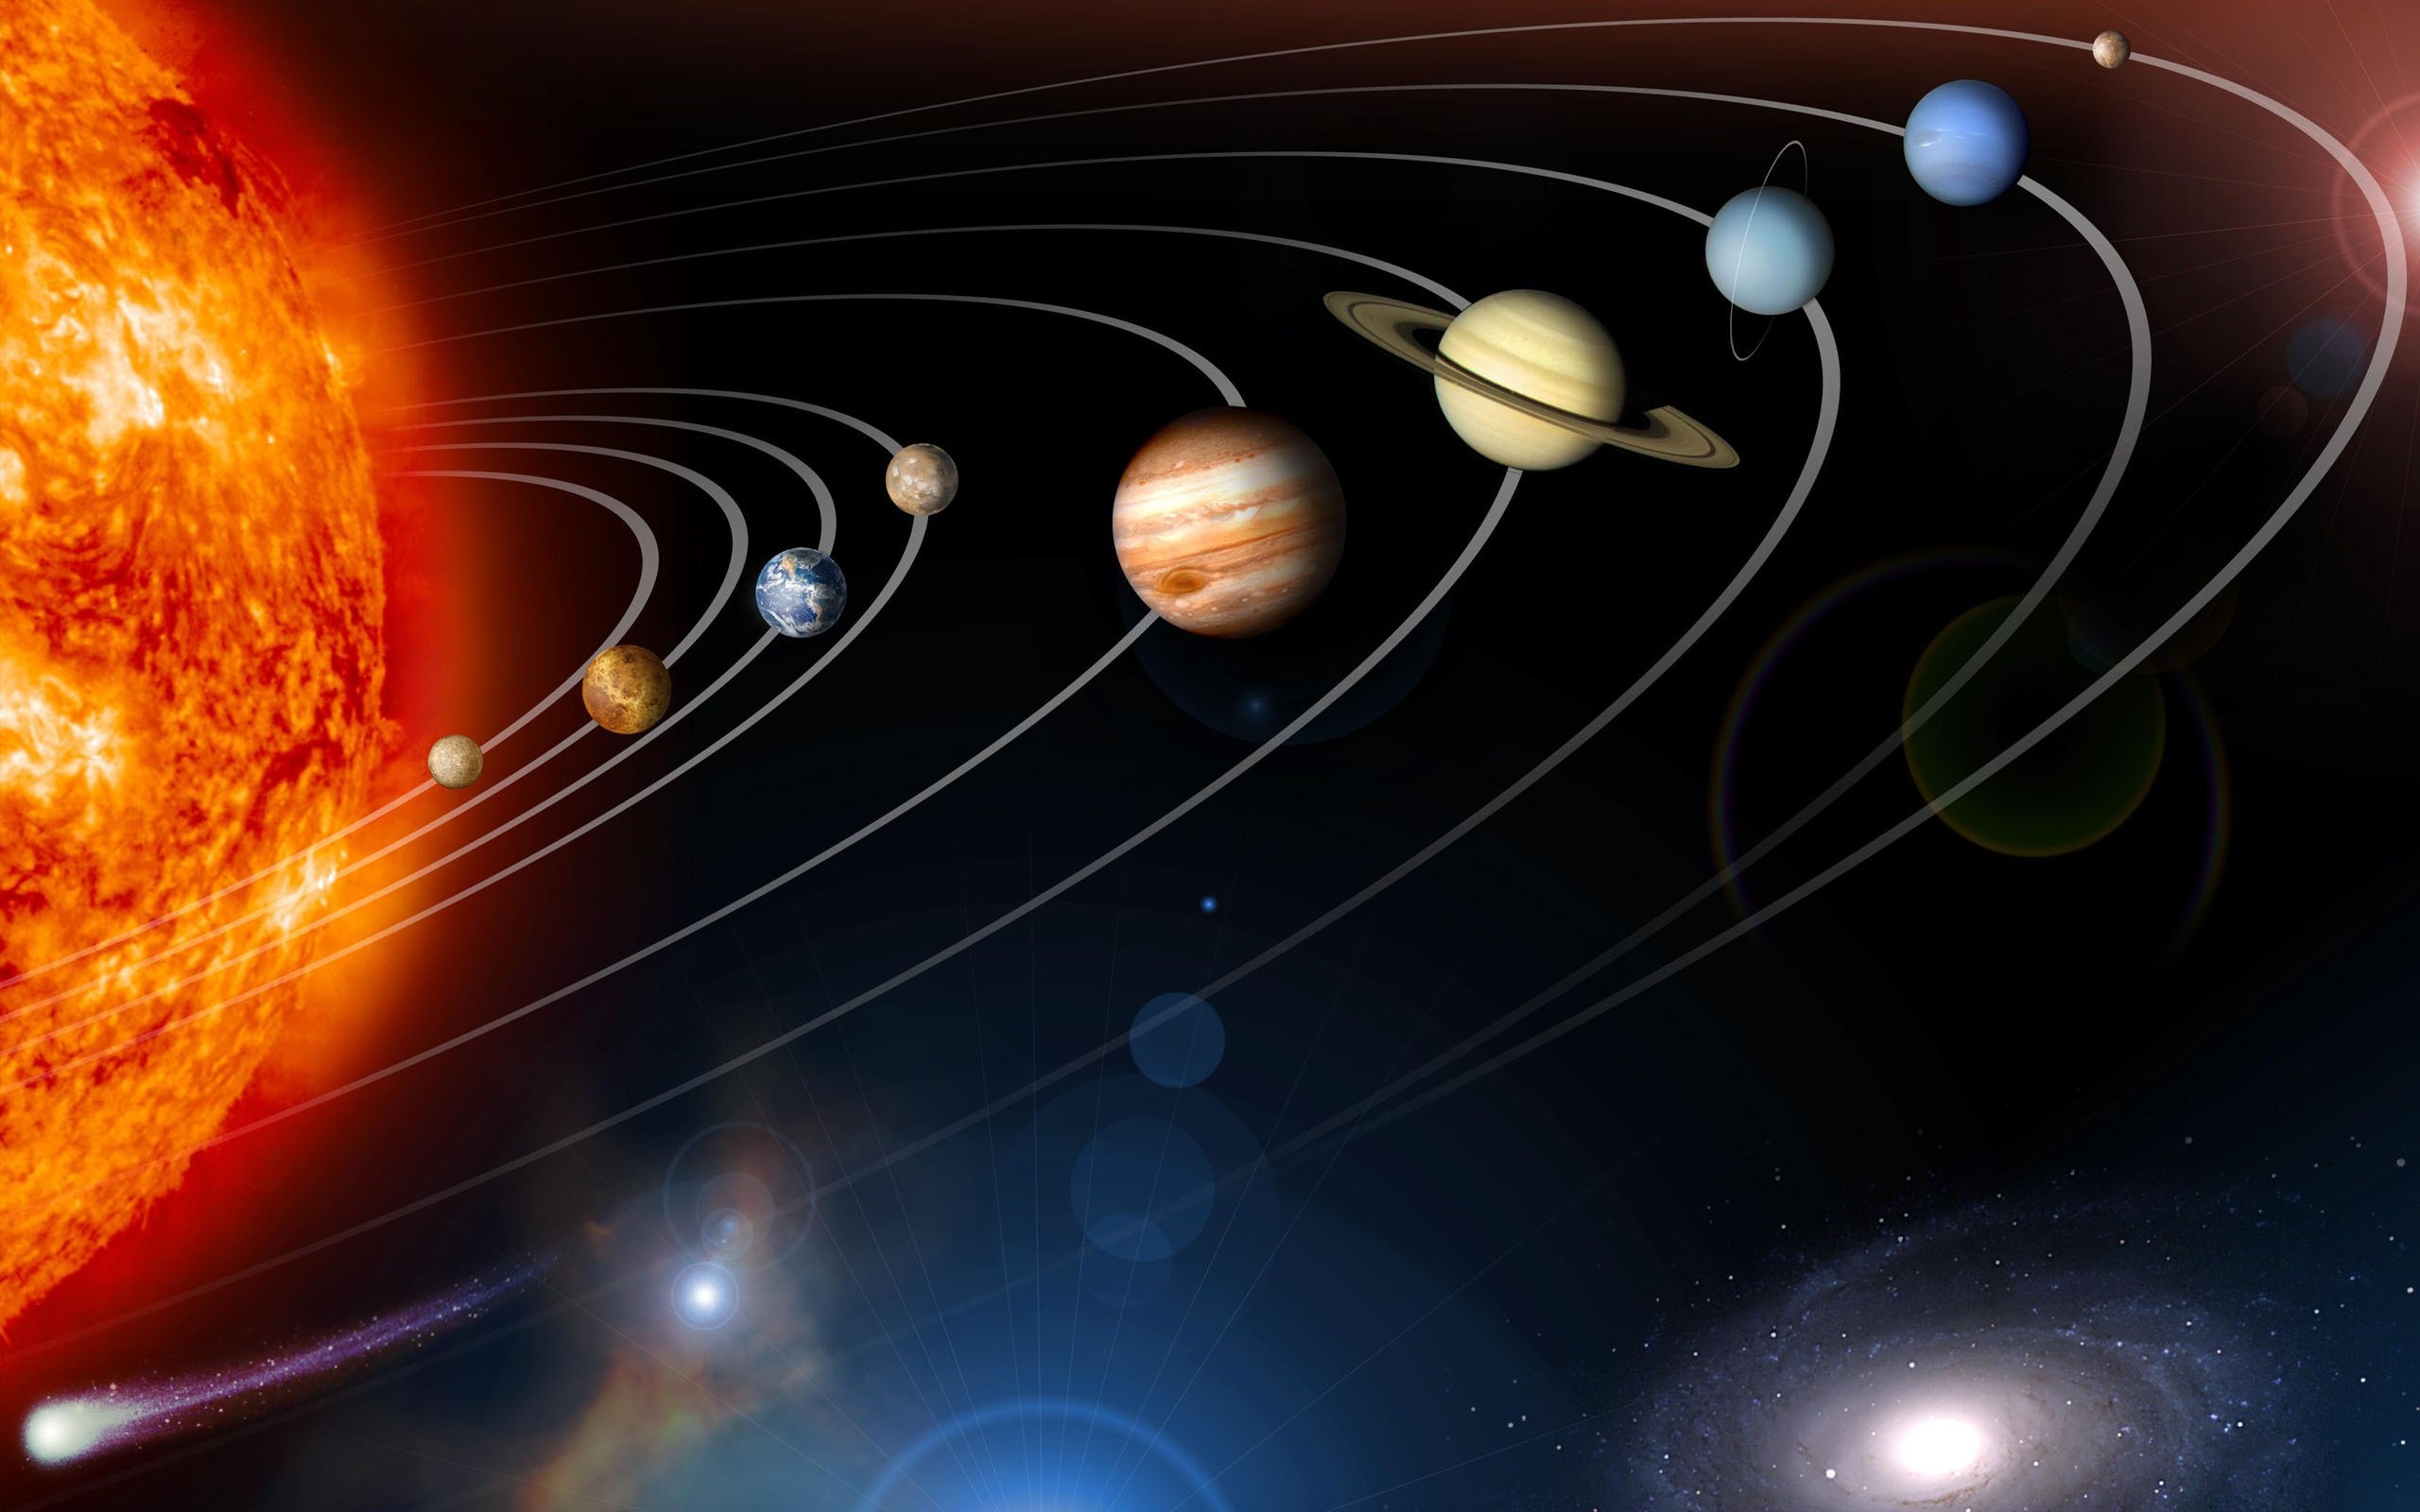 Planets Photos Download The BEST Free Planets Stock Photos  HD Images